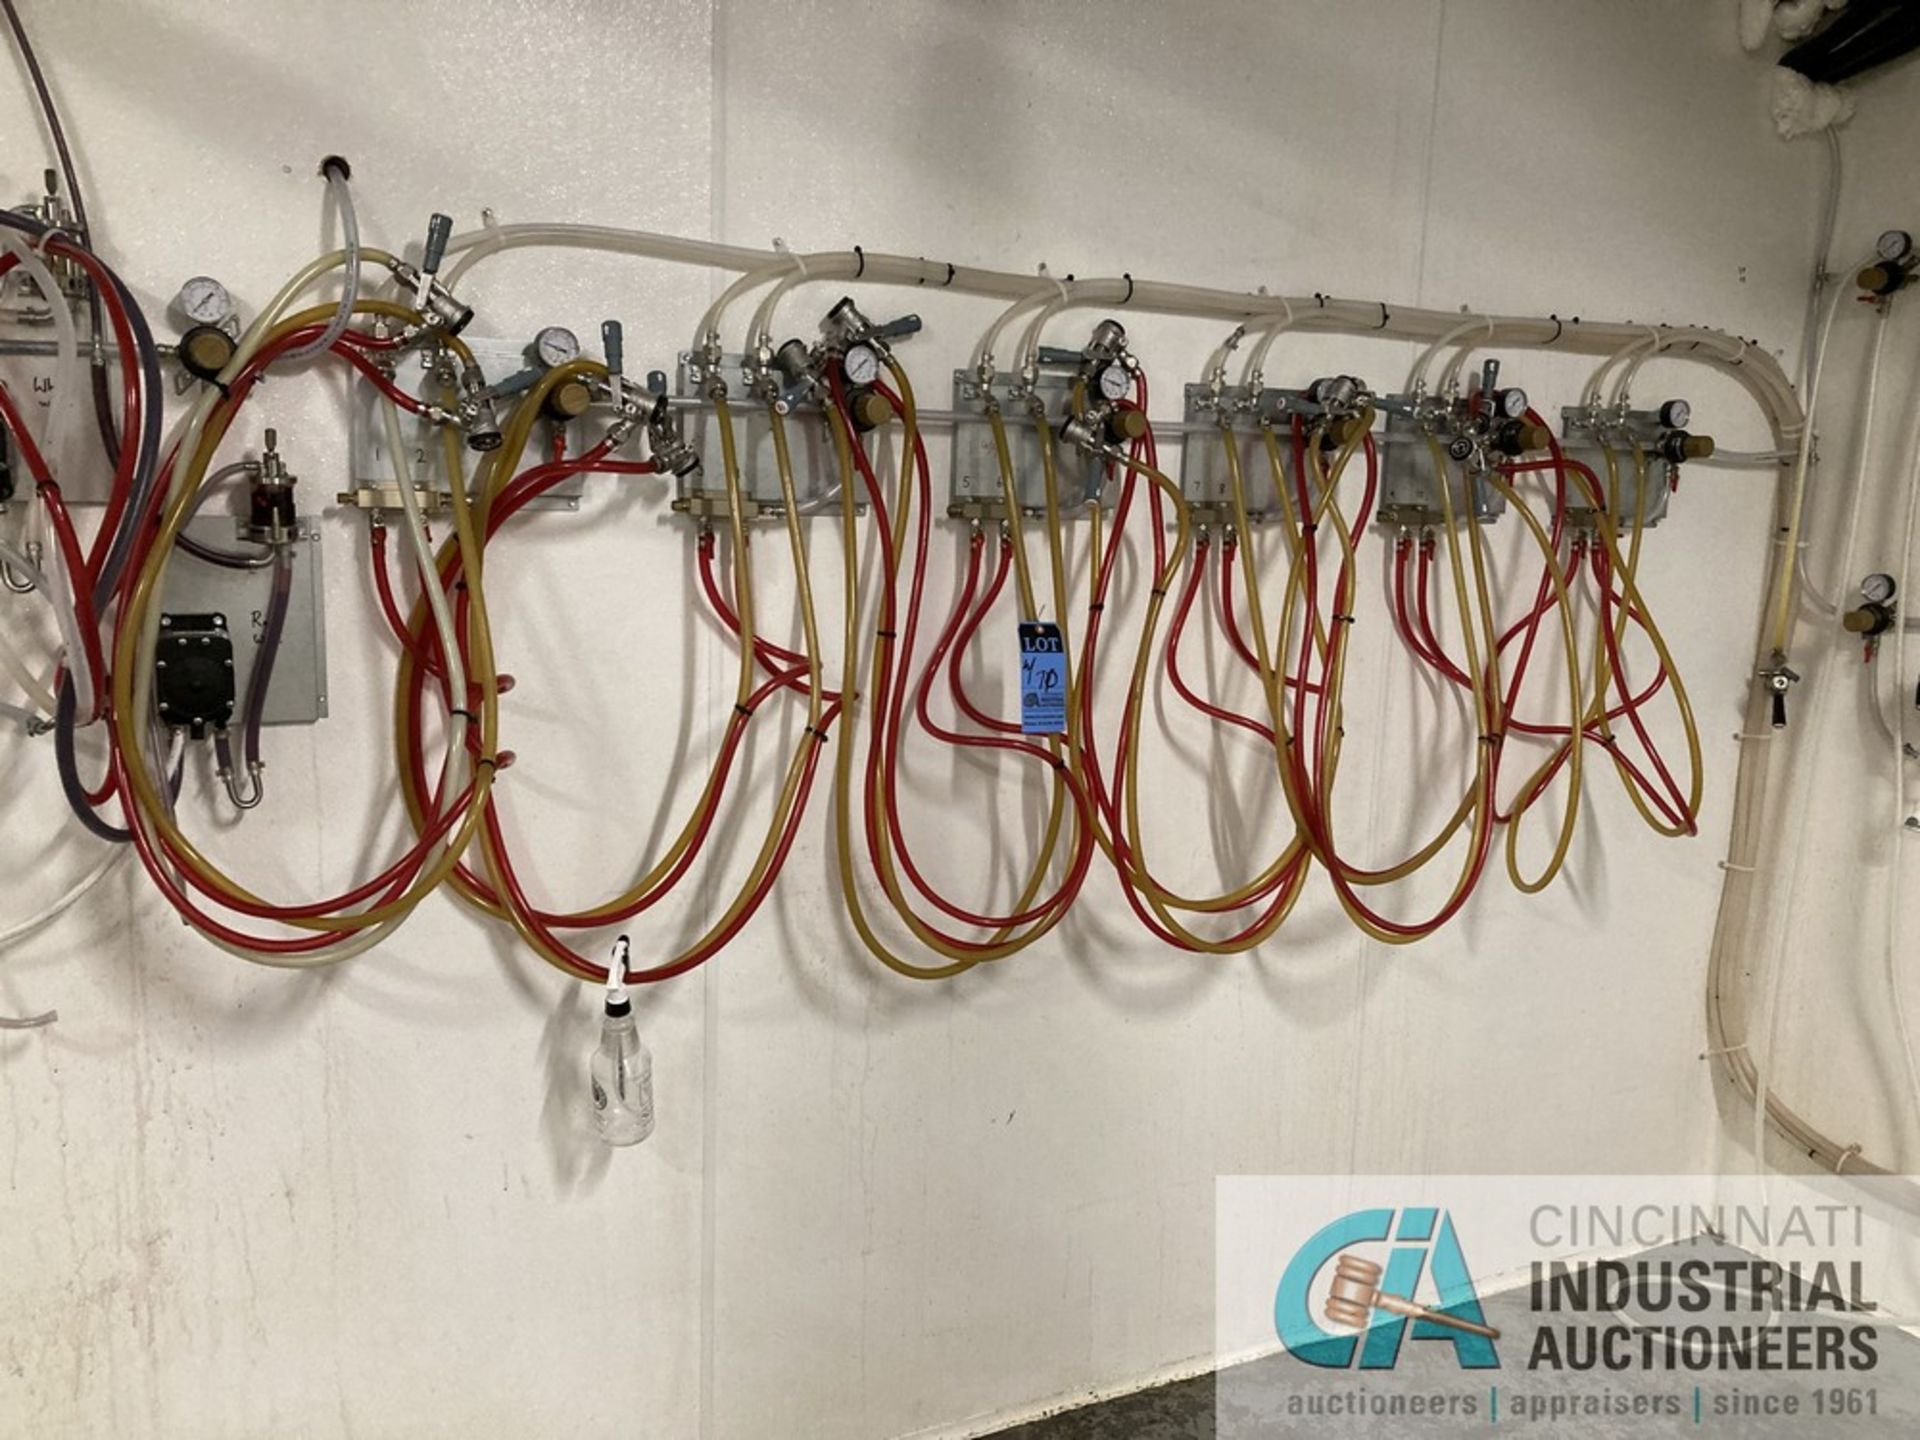 (LOT) BEER DISTRIBUTION LINES AND VALVES IN WALK-IN COOLER - NO CHASING LINES - STAYS CONFINED TO